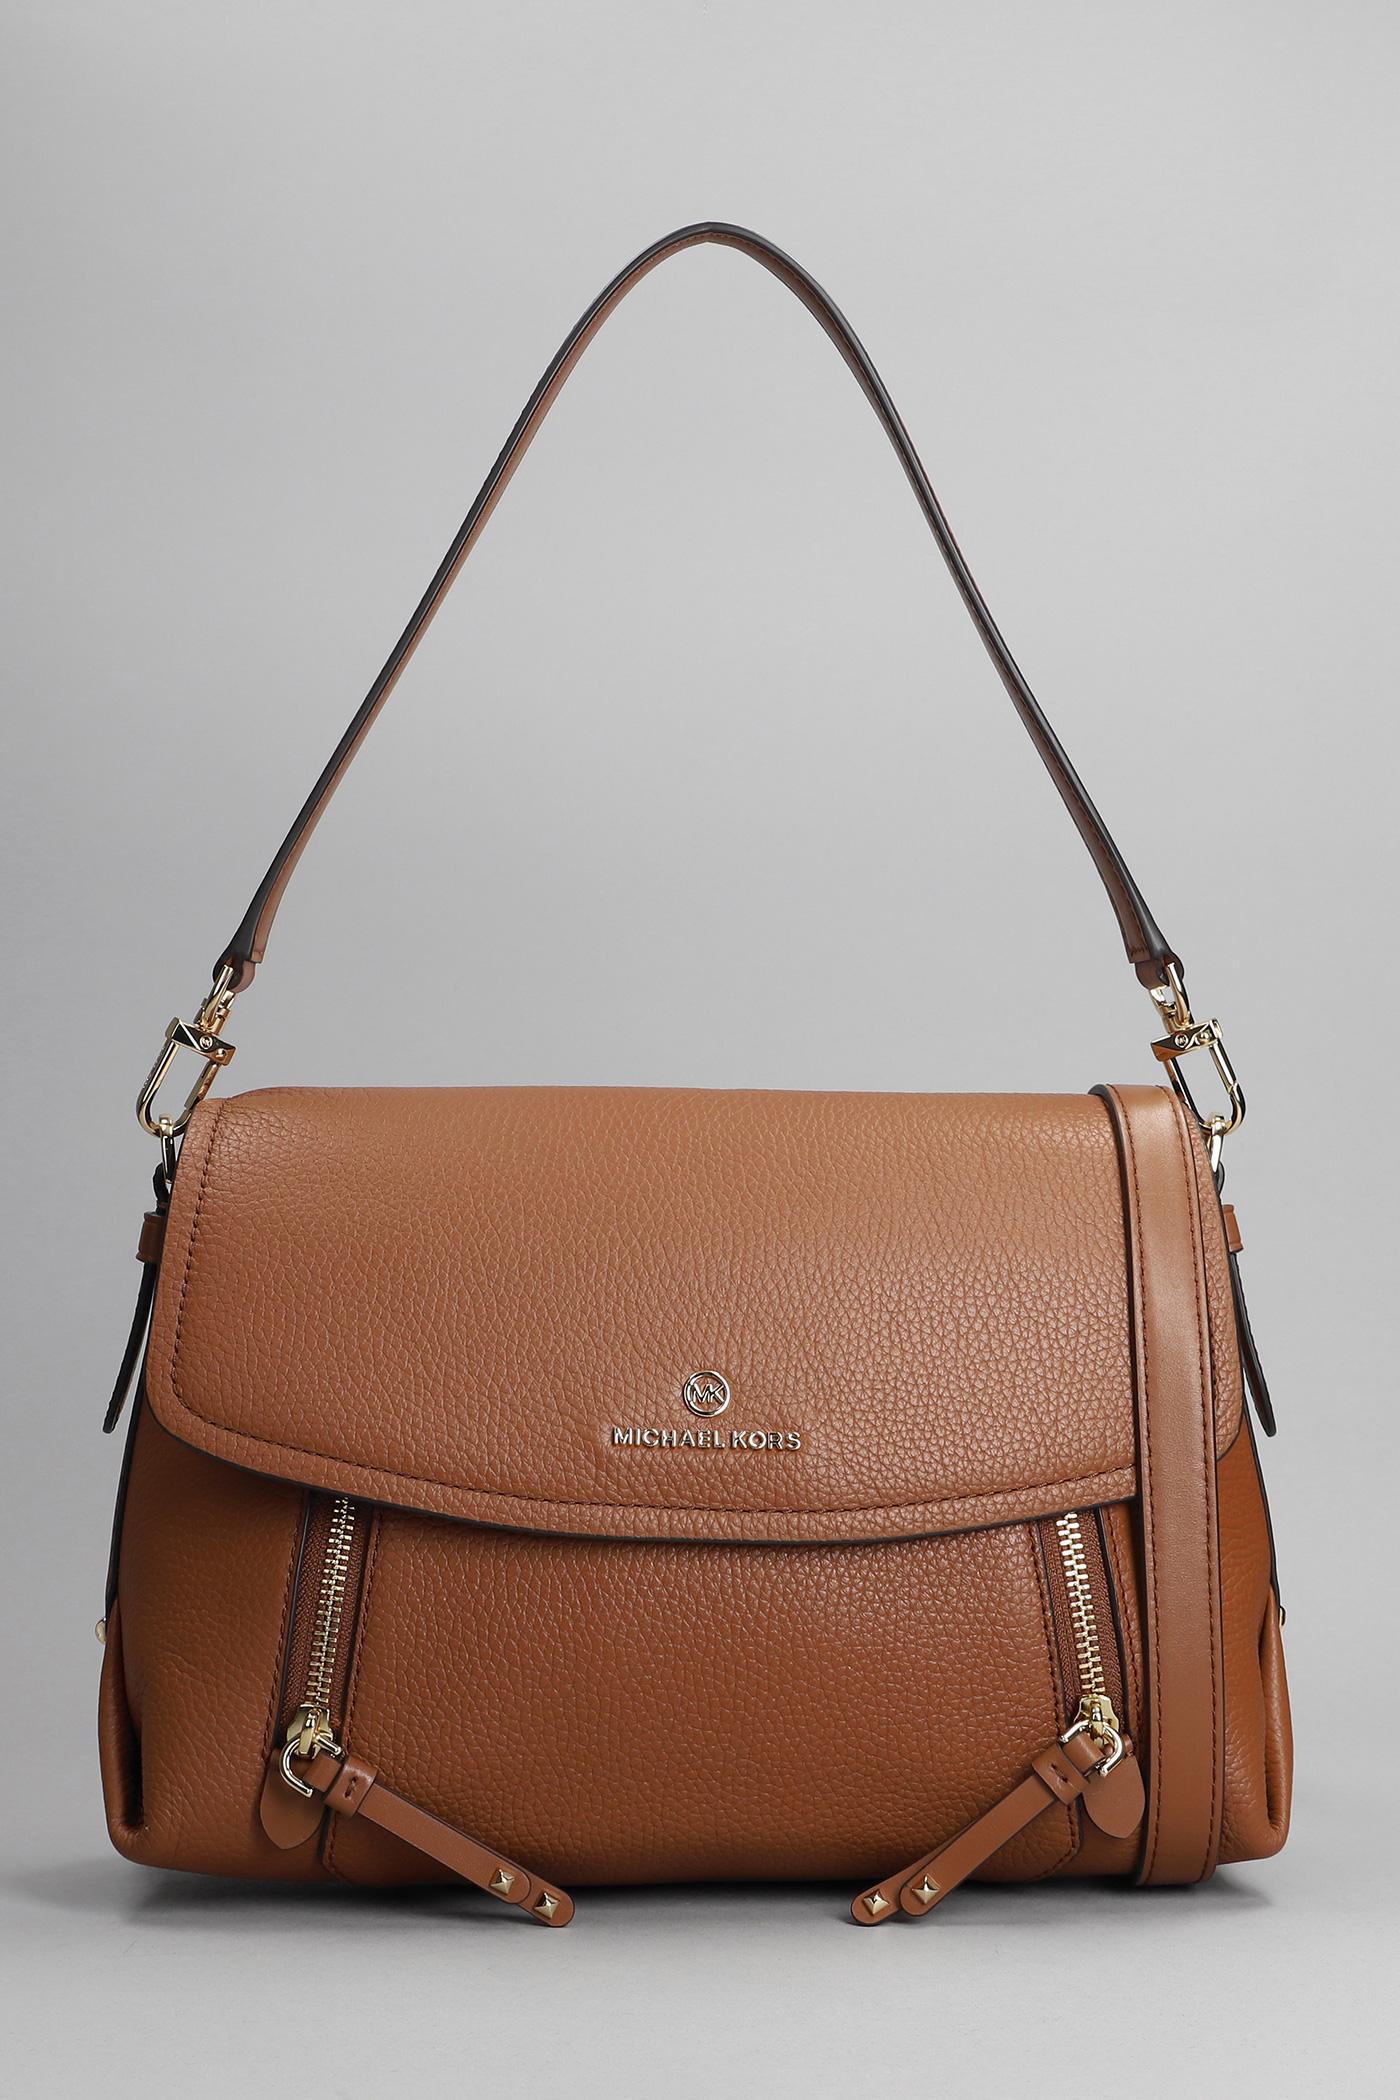 Michael Kors Brooklyn Shoulder Bag In Leather Color Leather in